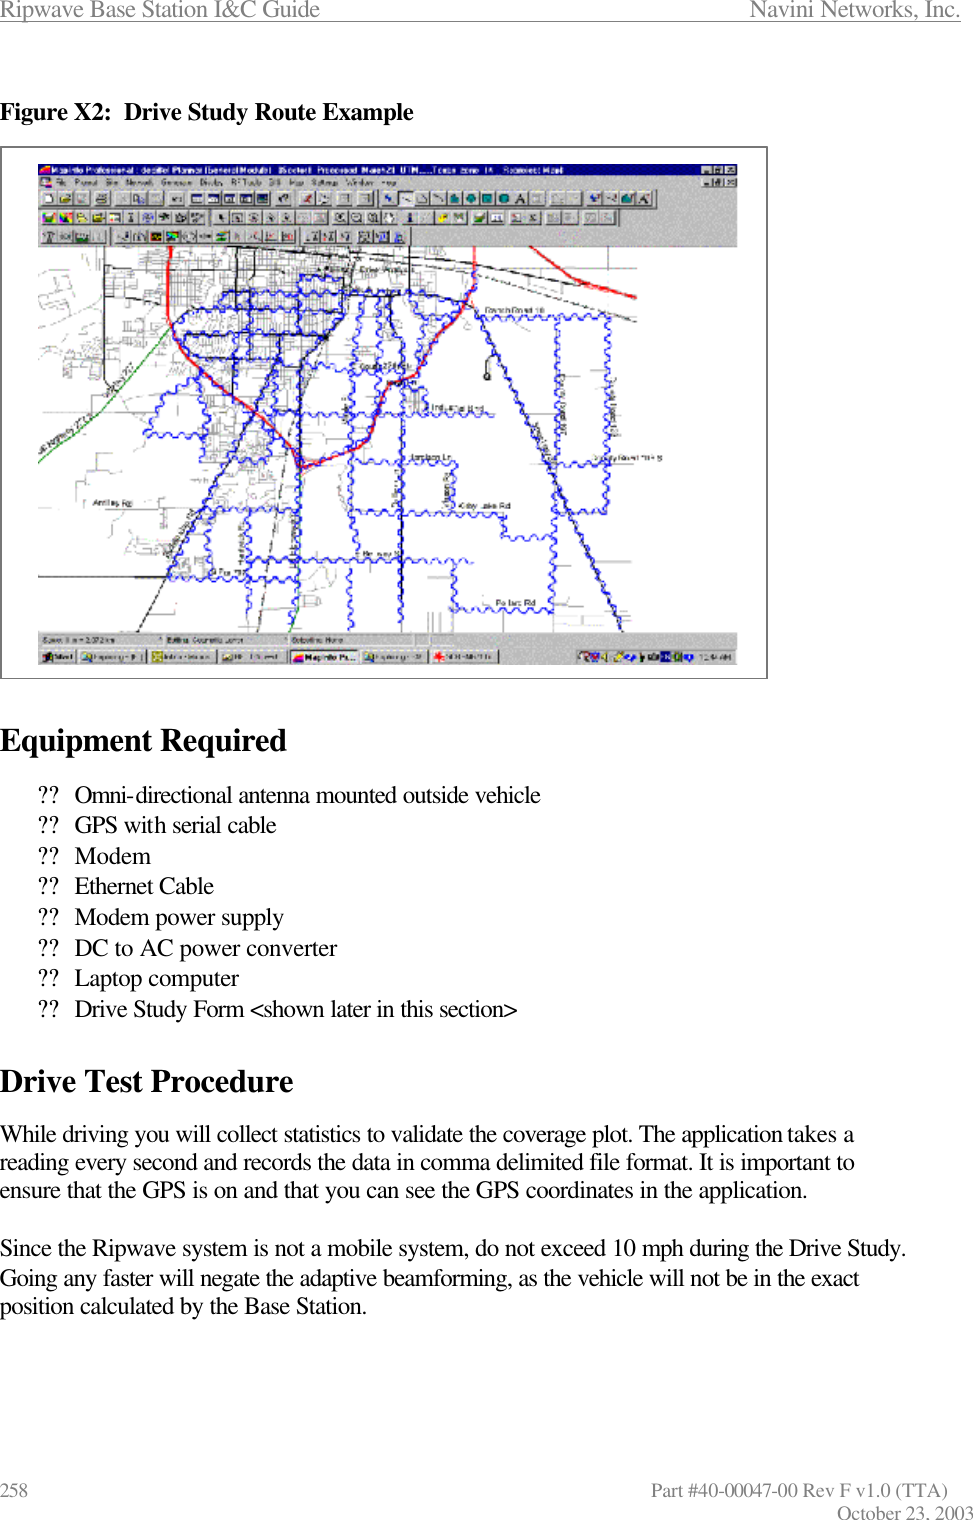 Ripwave Base Station I&amp;C Guide                      Navini Networks, Inc. 258                   Part #40-00047-00 Rev F v1.0 (TTA) October 23, 2003  Figure X2:  Drive Study Route Example                      Equipment Required  ?? Omni-directional antenna mounted outside vehicle ?? GPS with serial cable  ?? Modem ?? Ethernet Cable ?? Modem power supply ?? DC to AC power converter ?? Laptop computer ?? Drive Study Form &lt;shown later in this section&gt;   Drive Test Procedure  While driving you will collect statistics to validate the coverage plot. The application takes a reading every second and records the data in comma delimited file format. It is important to ensure that the GPS is on and that you can see the GPS coordinates in the application.   Since the Ripwave system is not a mobile system, do not exceed 10 mph during the Drive Study. Going any faster will negate the adaptive beamforming, as the vehicle will not be in the exact position calculated by the Base Station.   